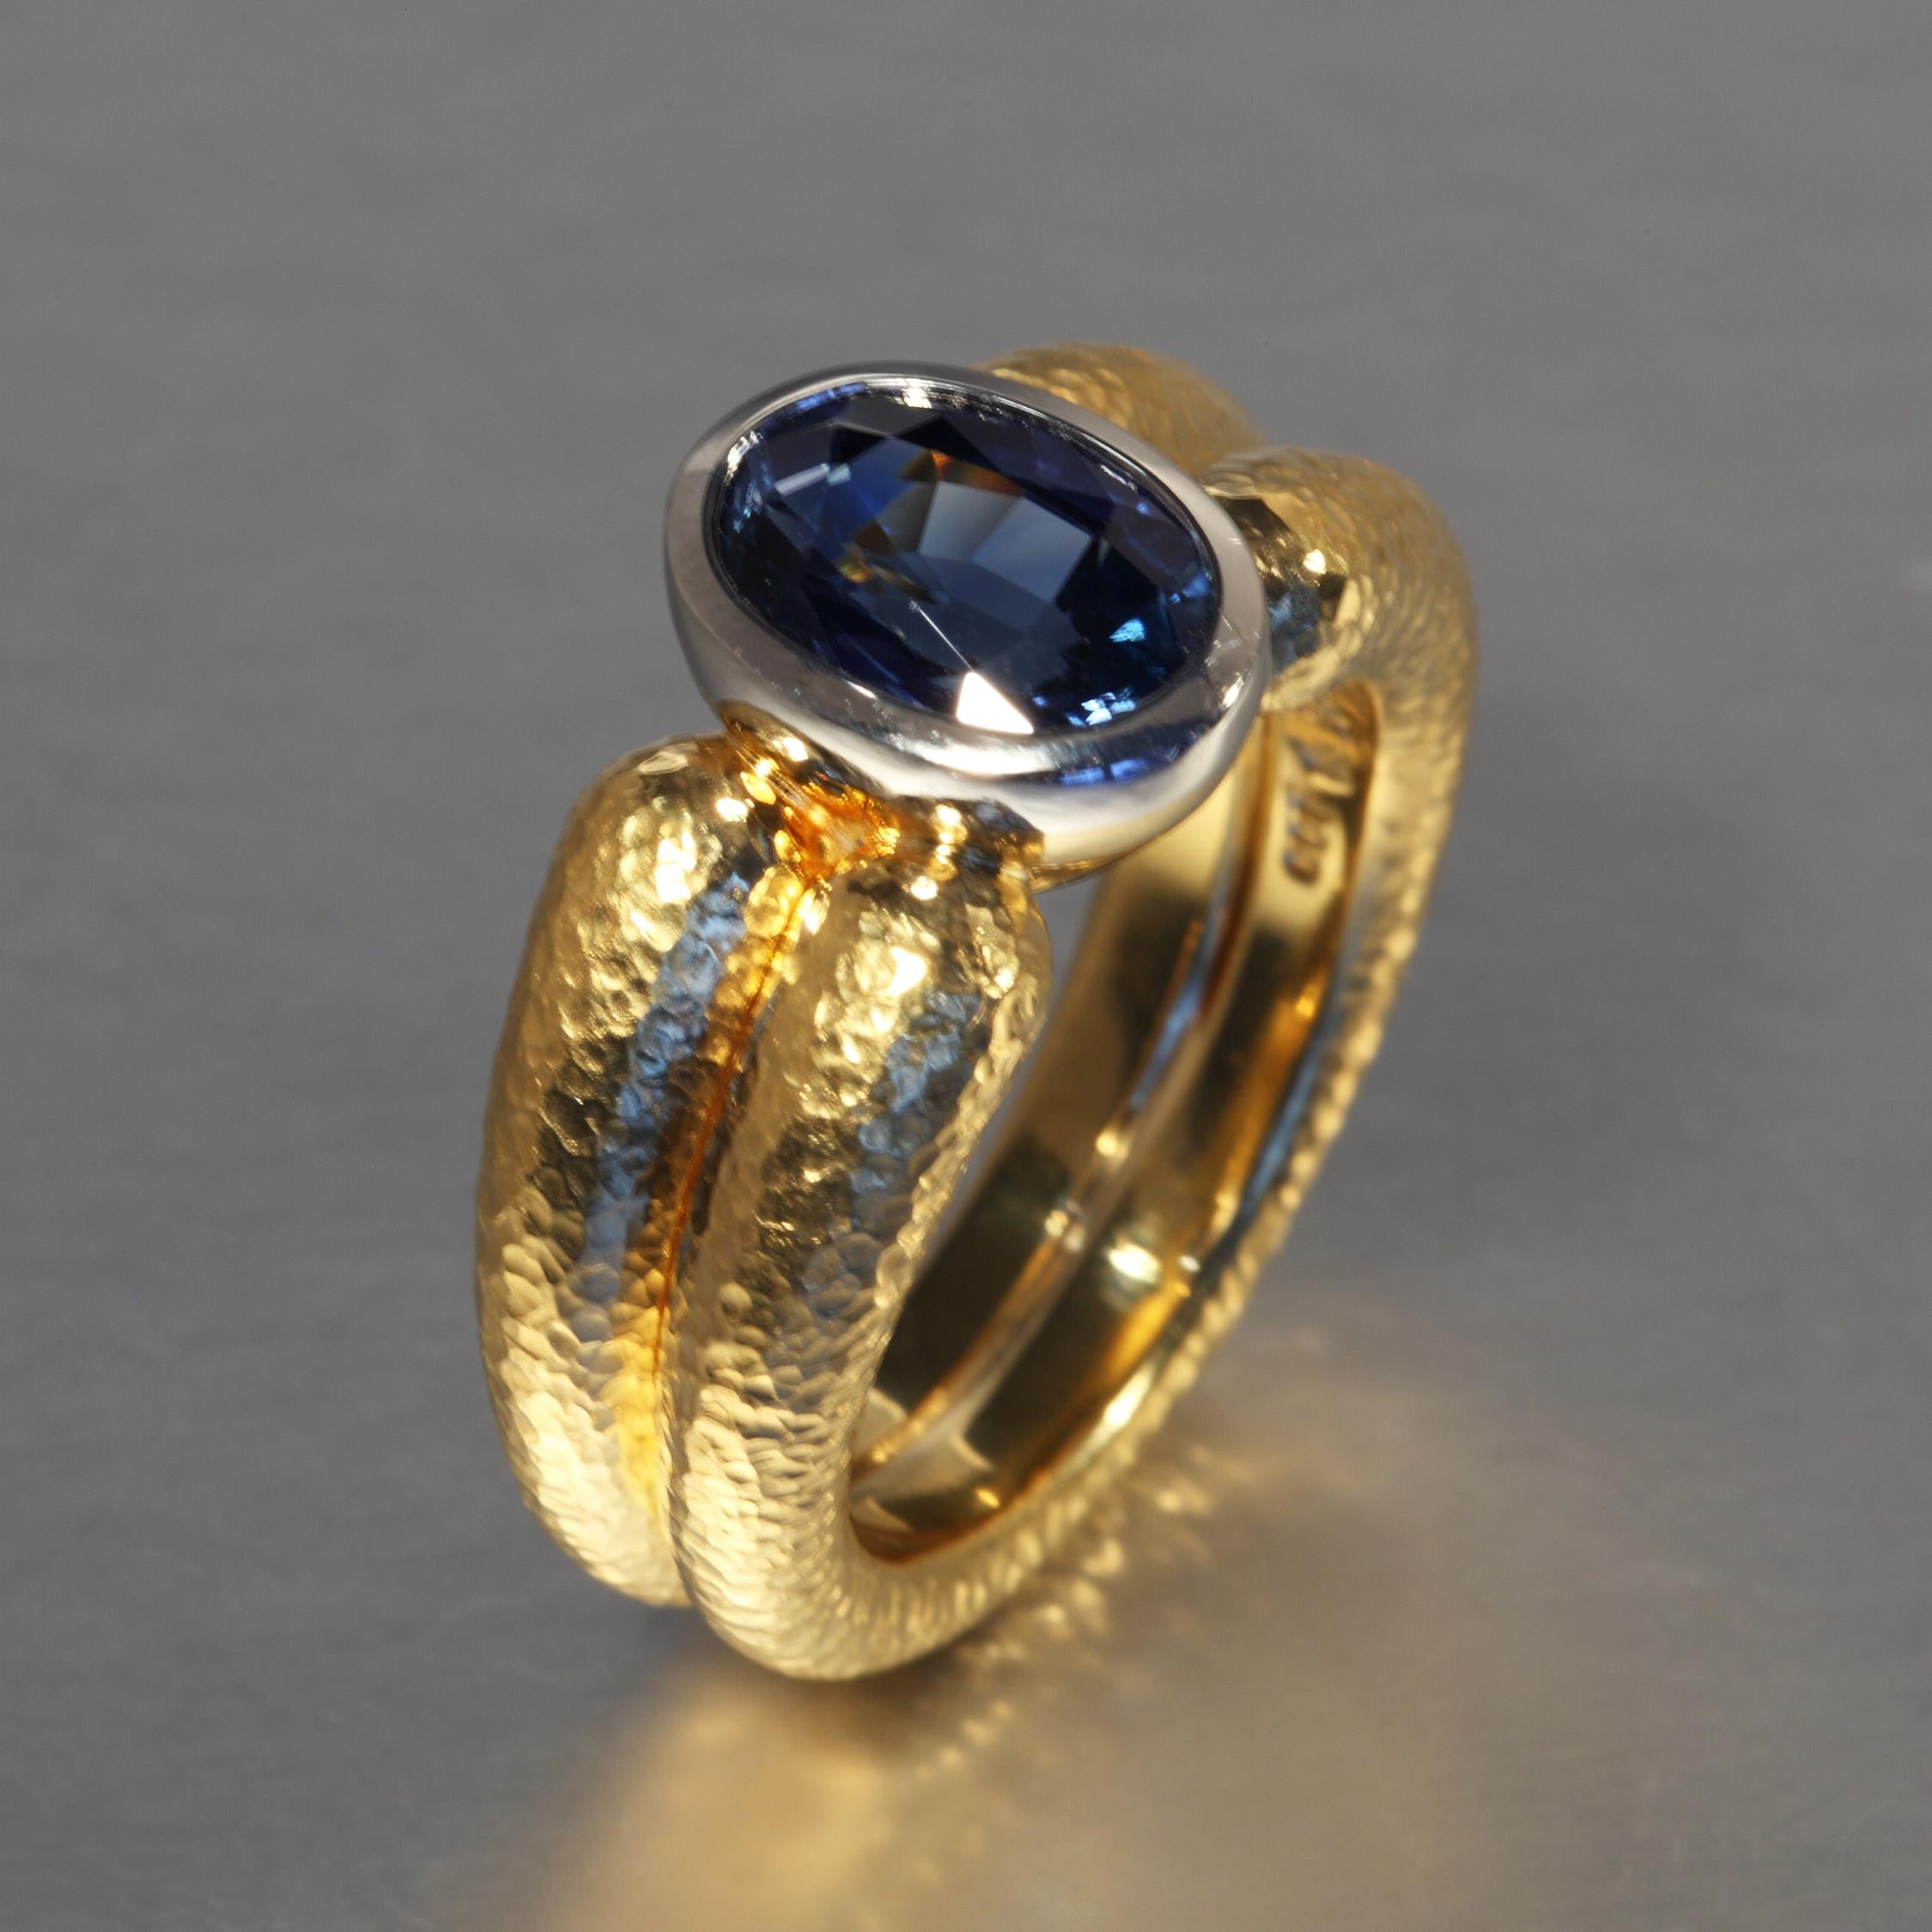 This natural 3.07 carat oval blue Sri Lanka sapphire is set in a gold ring with a platinum rim around the stone. The sapphire is accompanied by a GRS Report stating no indication of thermal treatment. It is designed and hand made (no casting) in